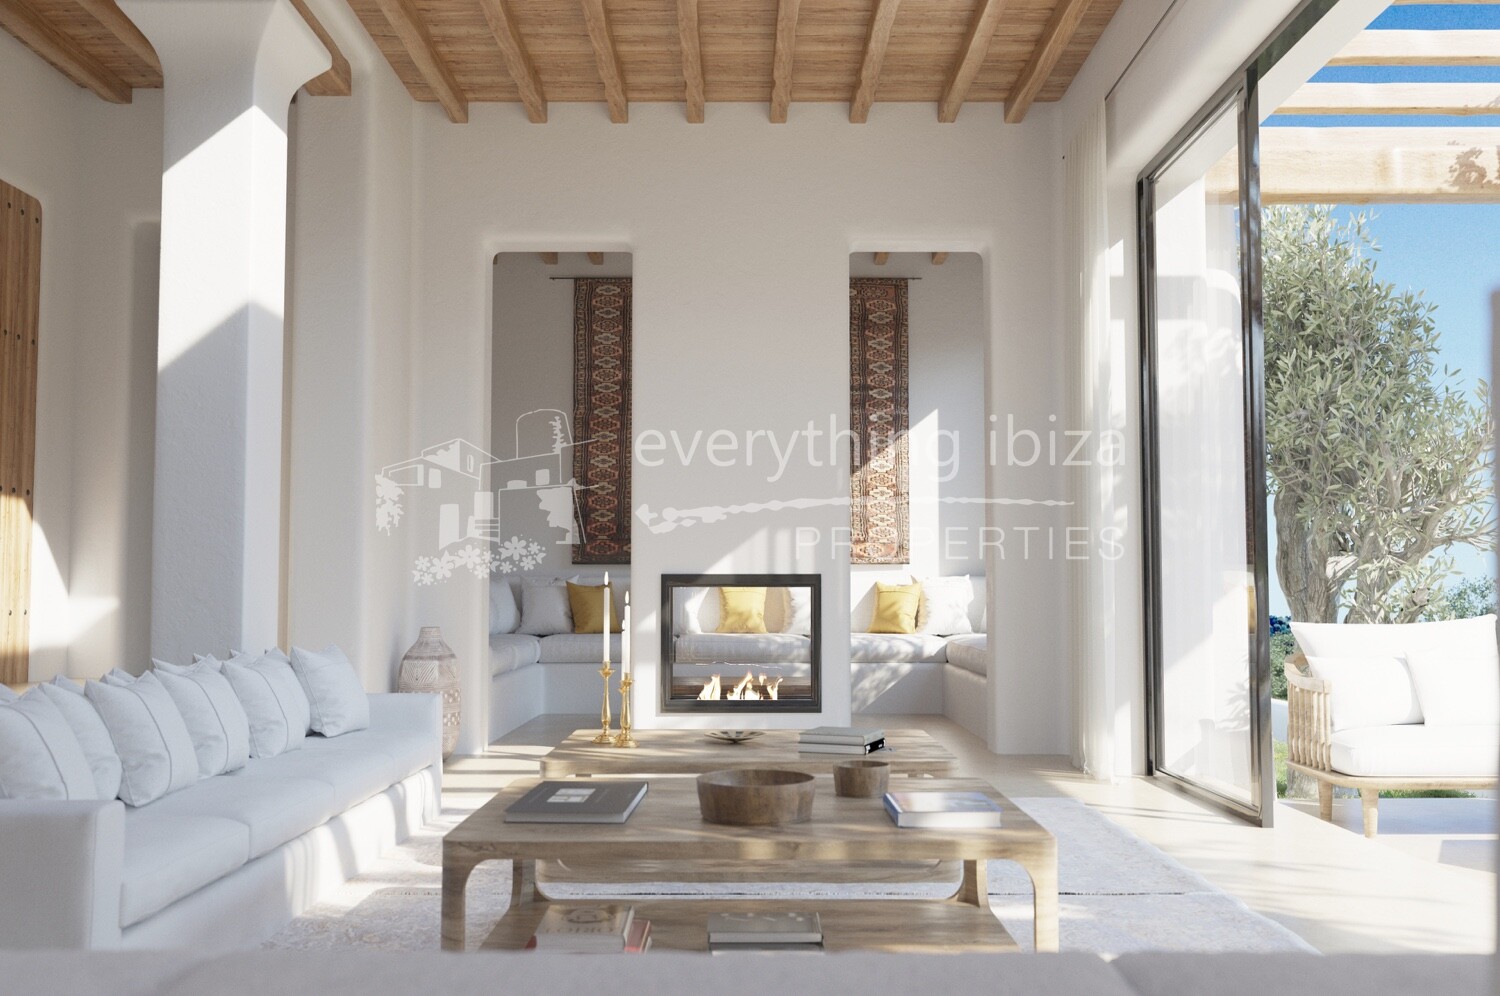 Large Country Plot with 'Blakstad' Designed Villa Project, ref. 1481, for sale in Ibiza by everything ibiza Properties